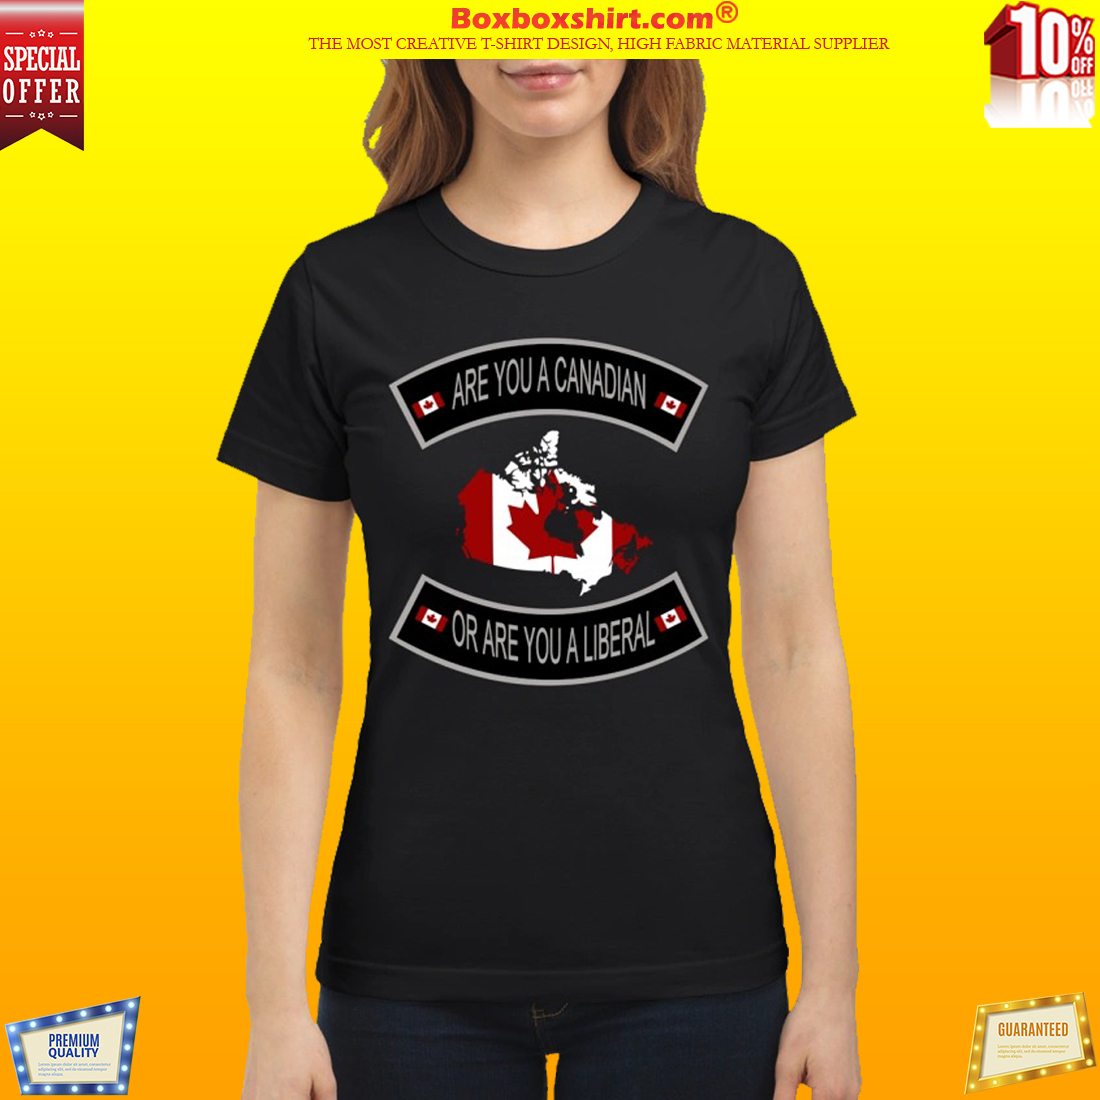 Are you a Canadian or are you a Liberal classic shirt